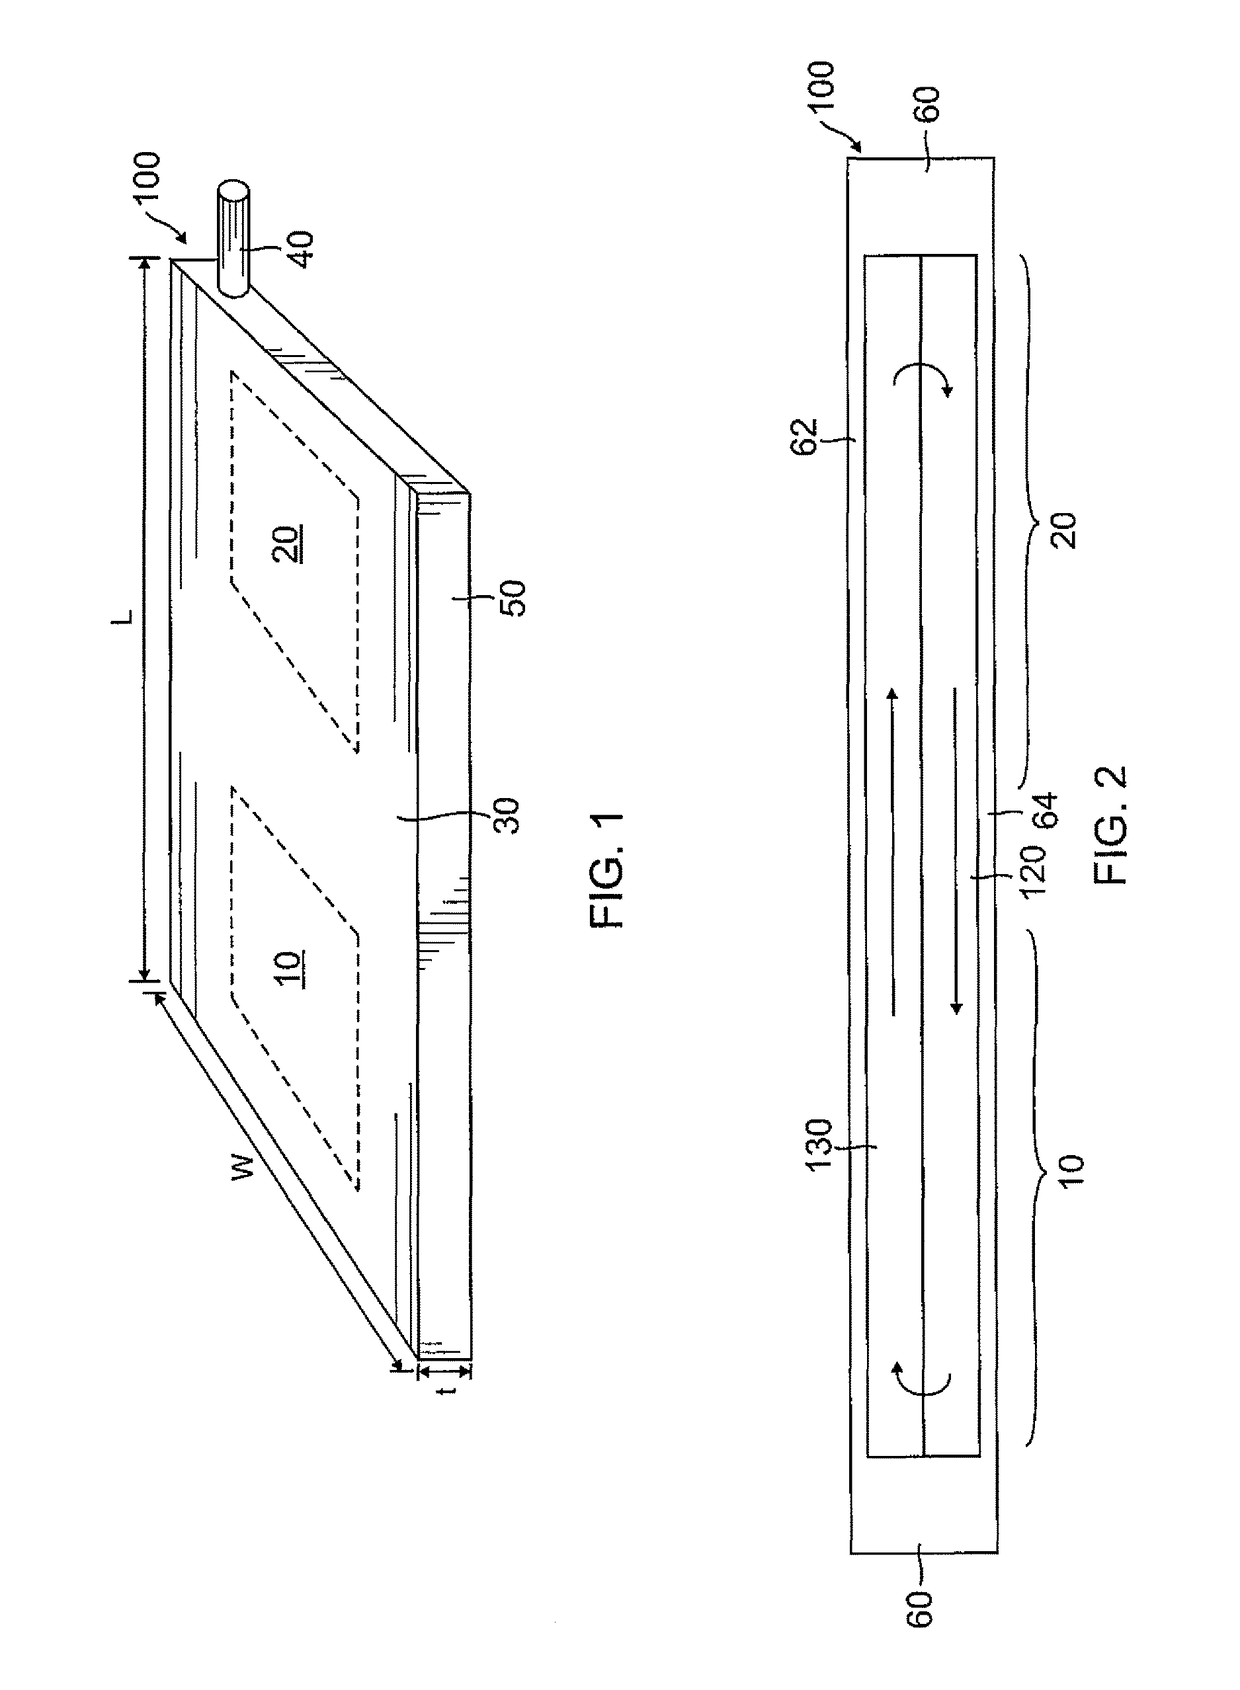 Planar heat pipe with architected core and vapor tolerant arterial wick